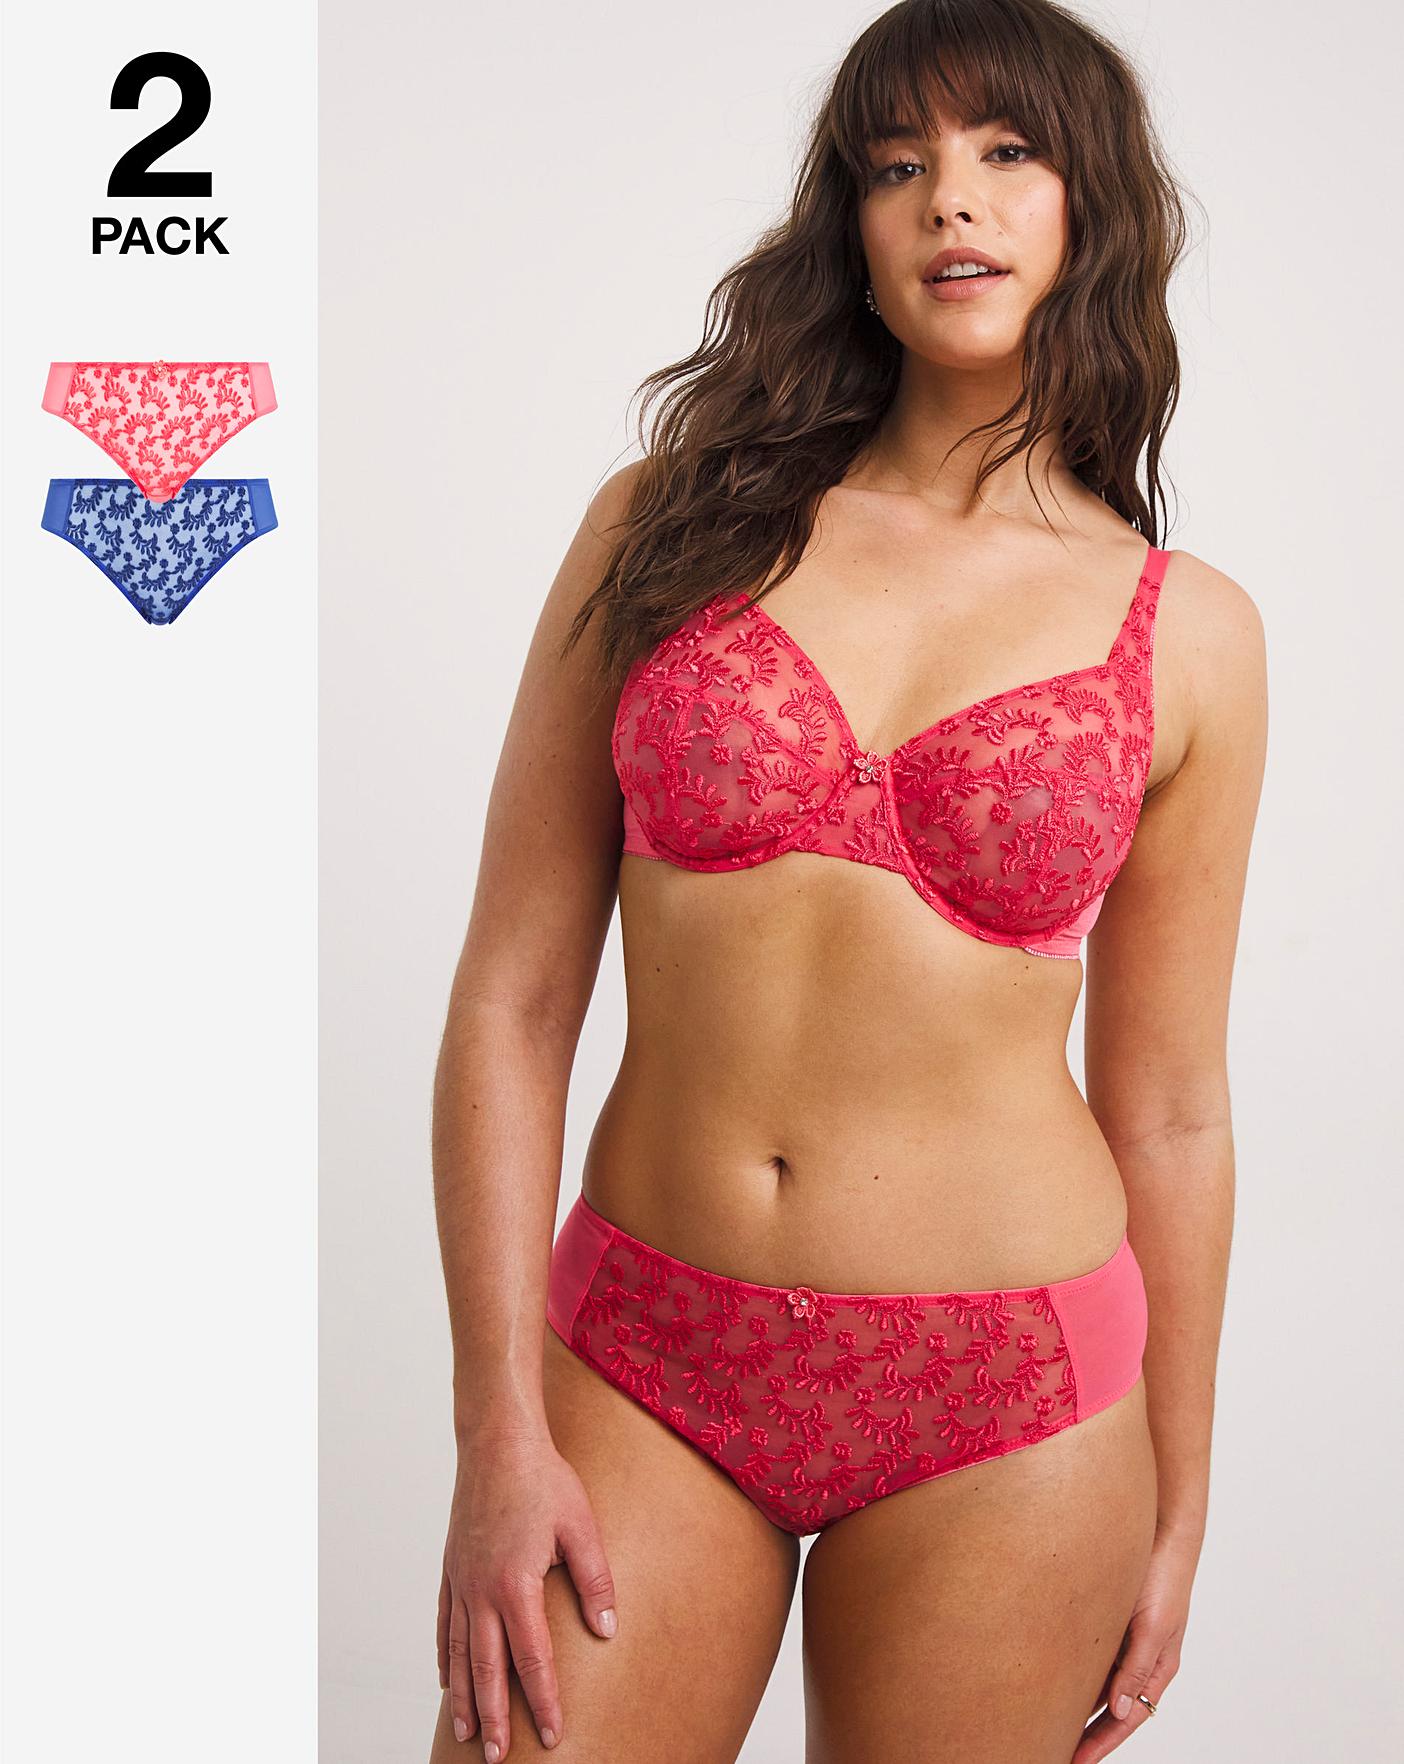 2 Pack Lesley Everyday Full Cup Bras